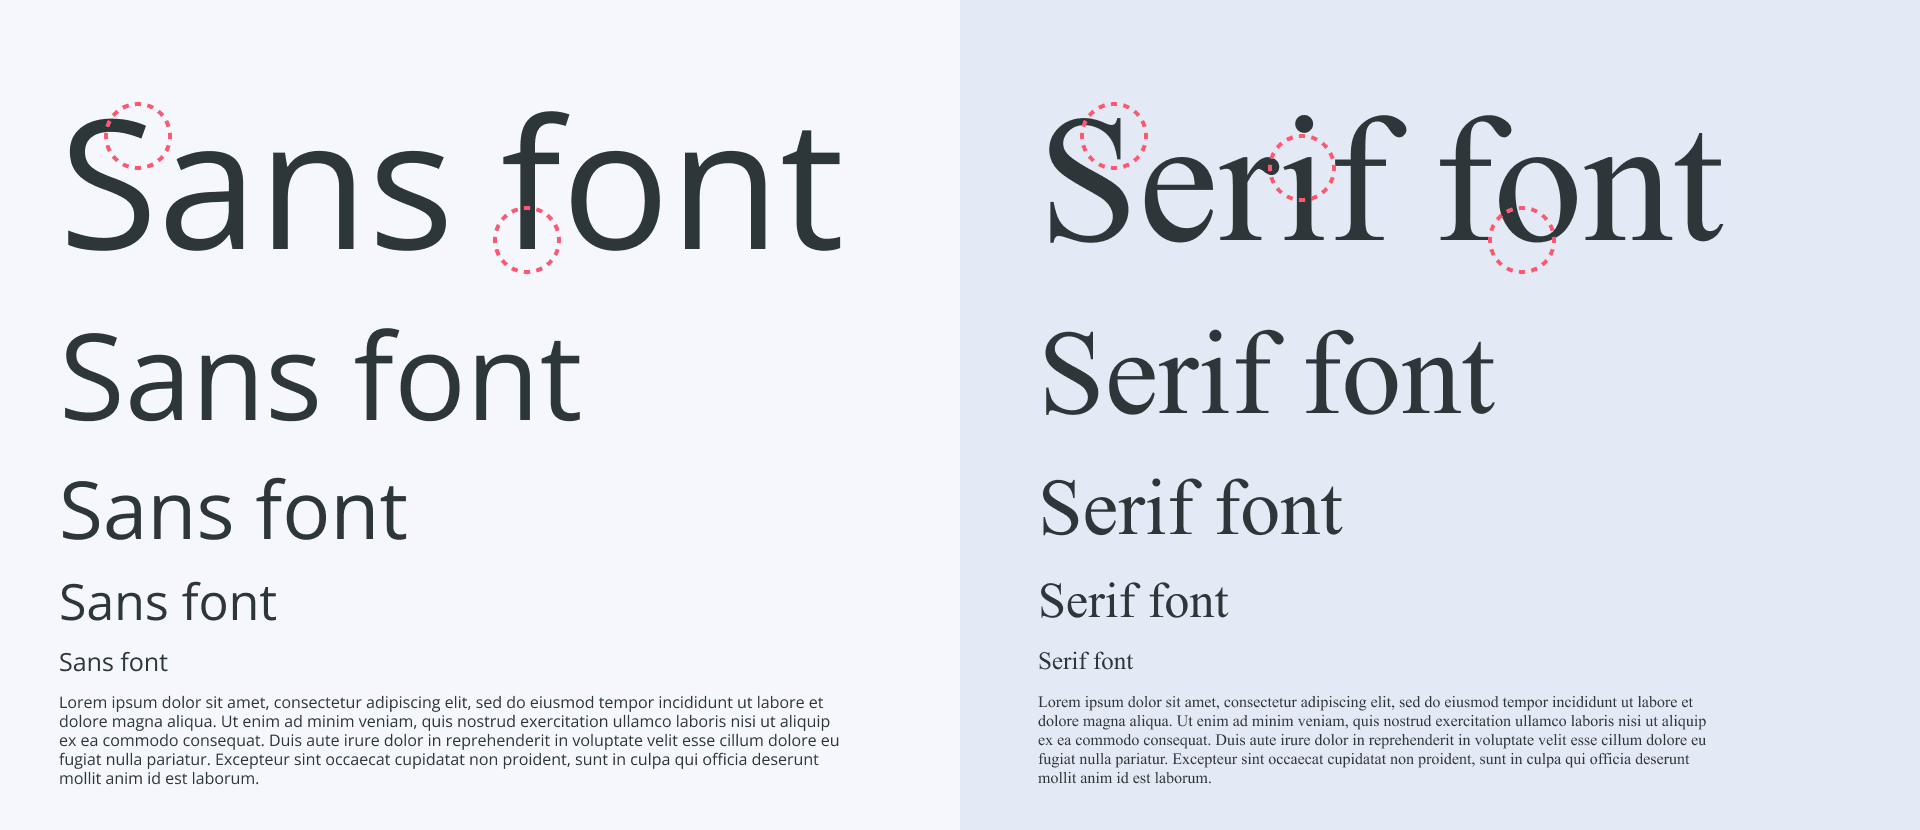 sans vs serif difference in fonts for resume.png